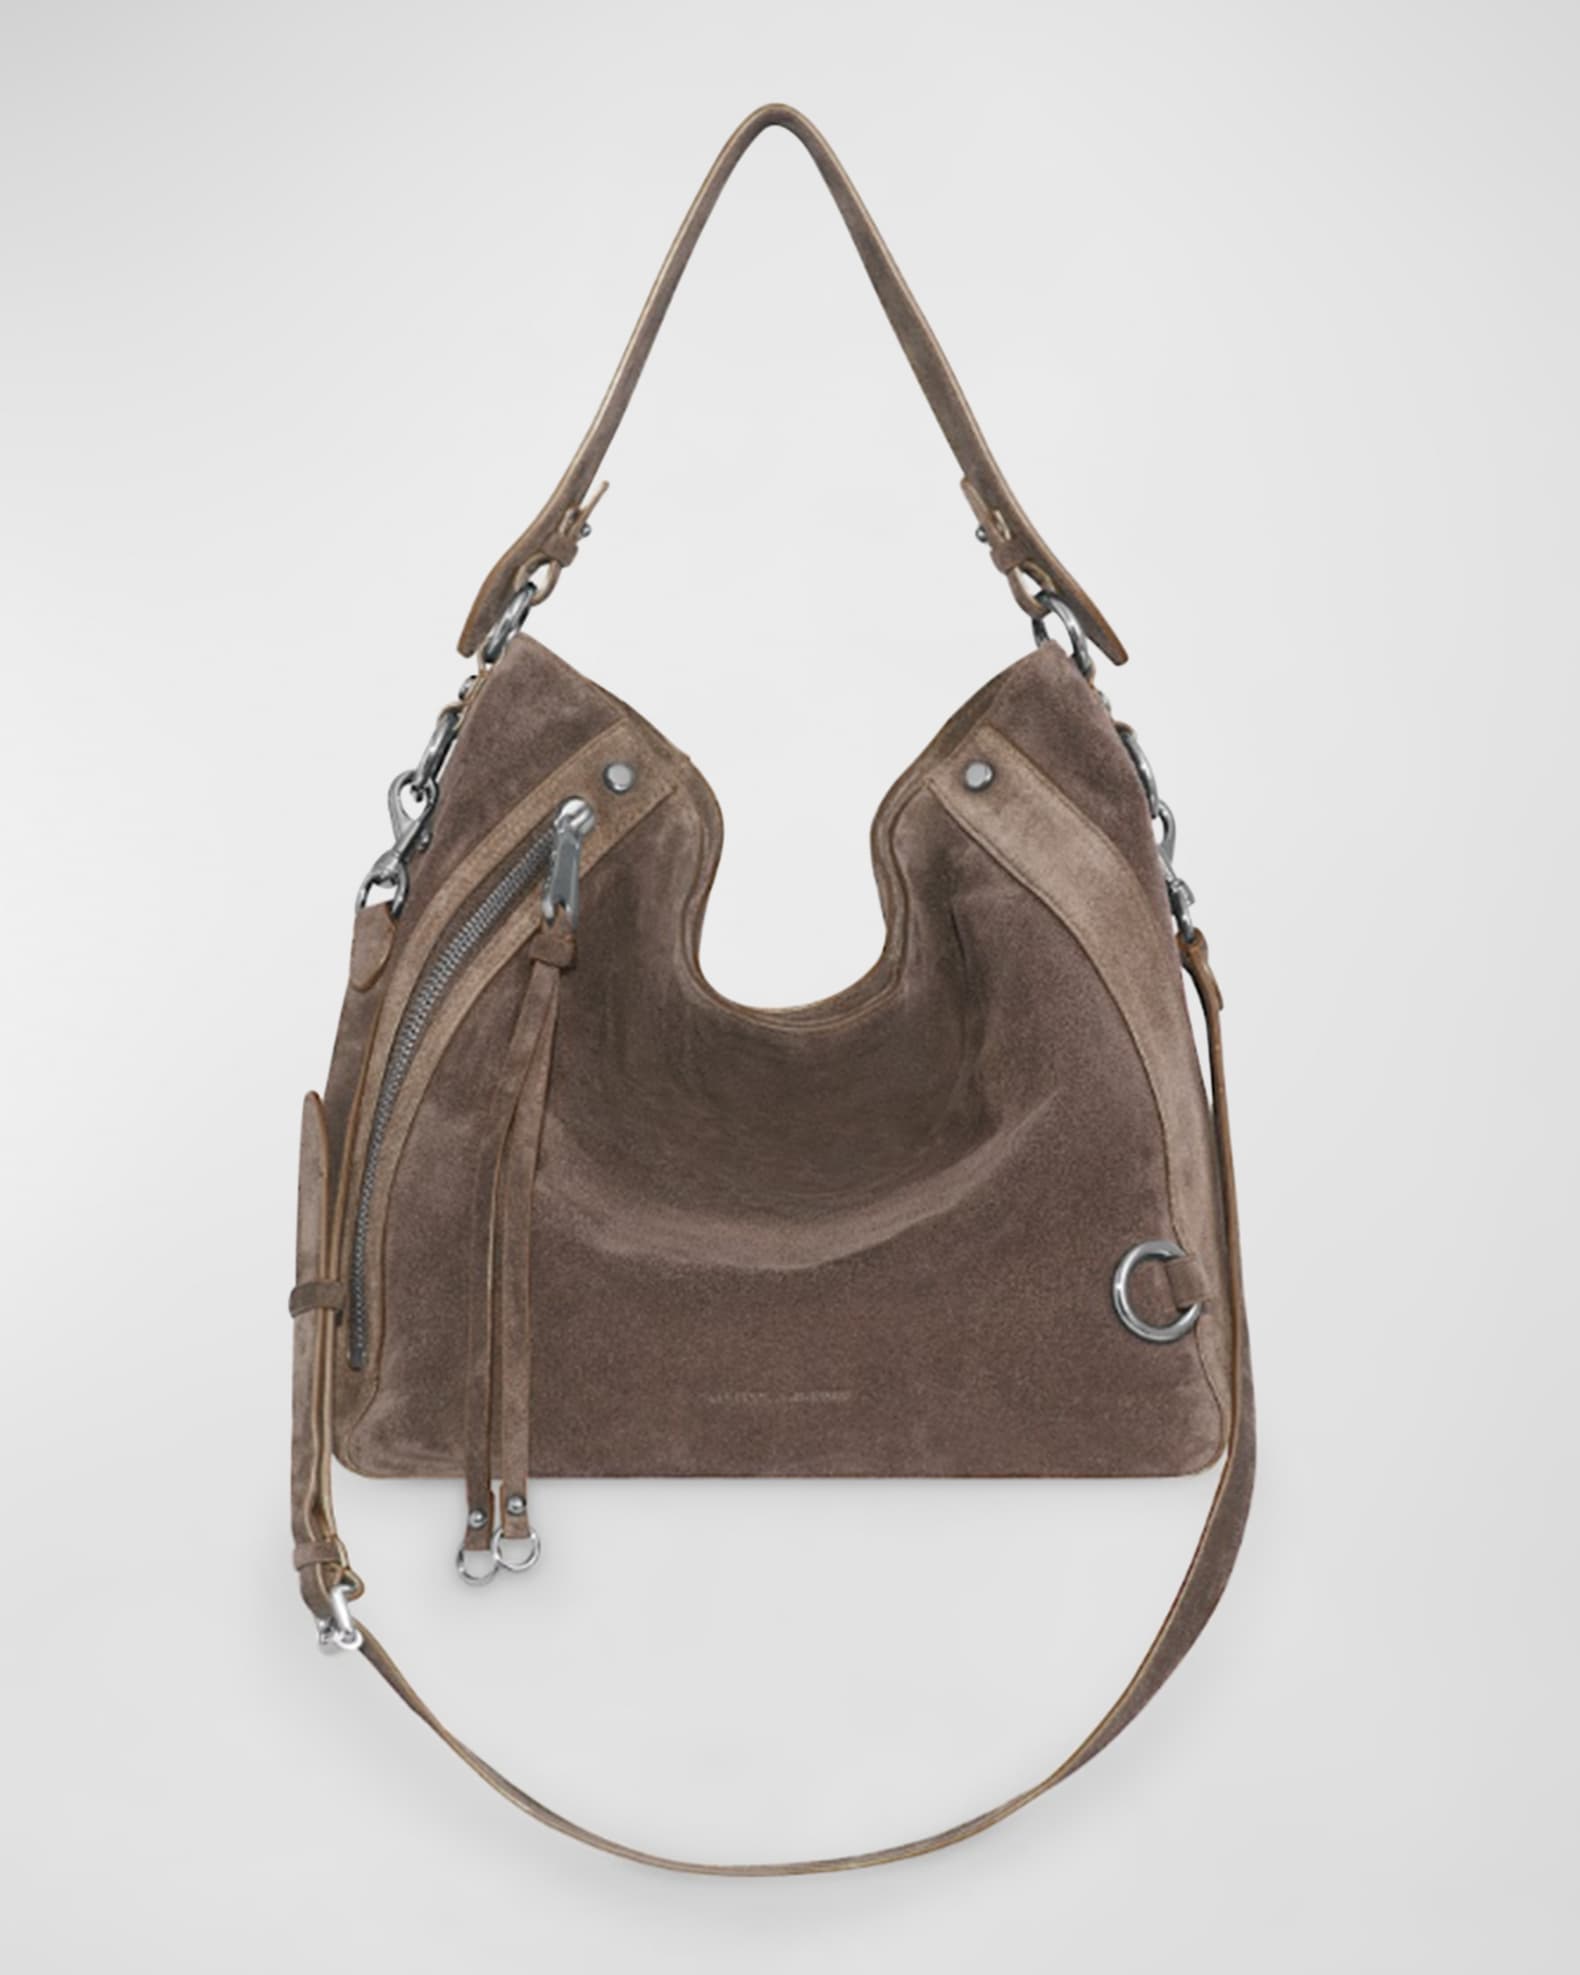 Rebecca Minkoff - Taupe Suede Hobo Shoulder Bag w/ Smooth Leather